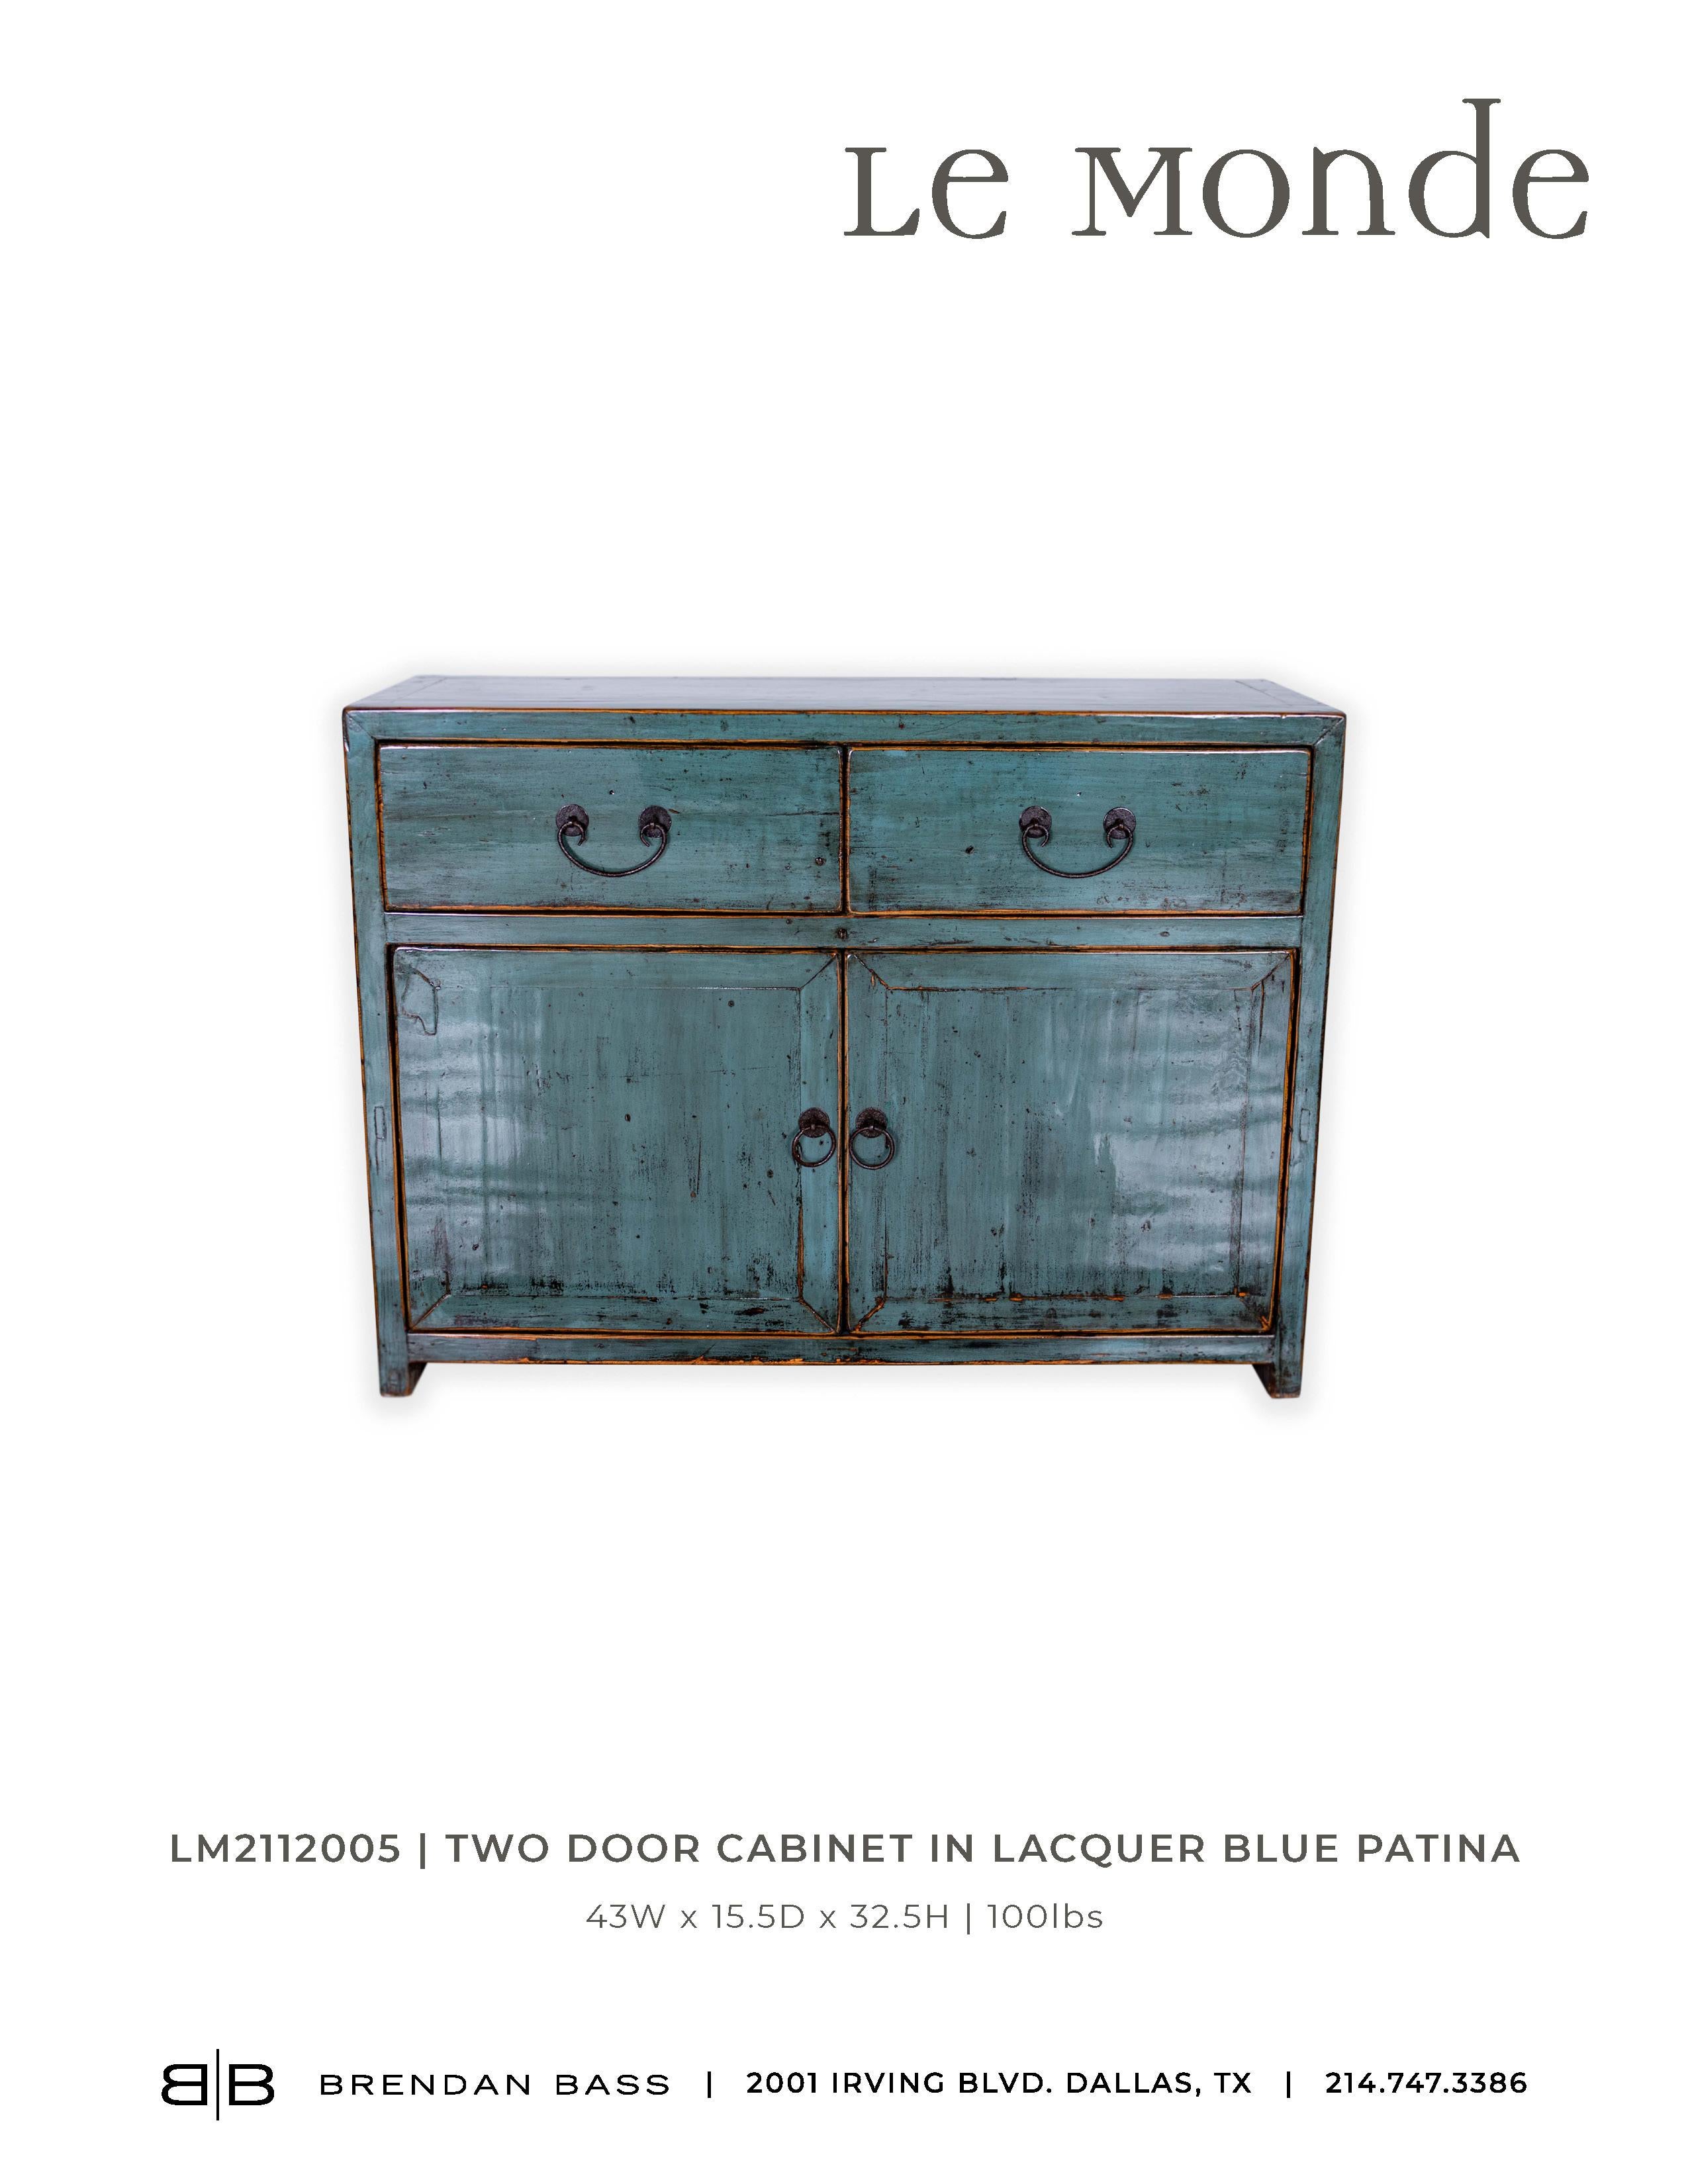 20th Century Two Door Cabinet in Lacquer Blue Patina